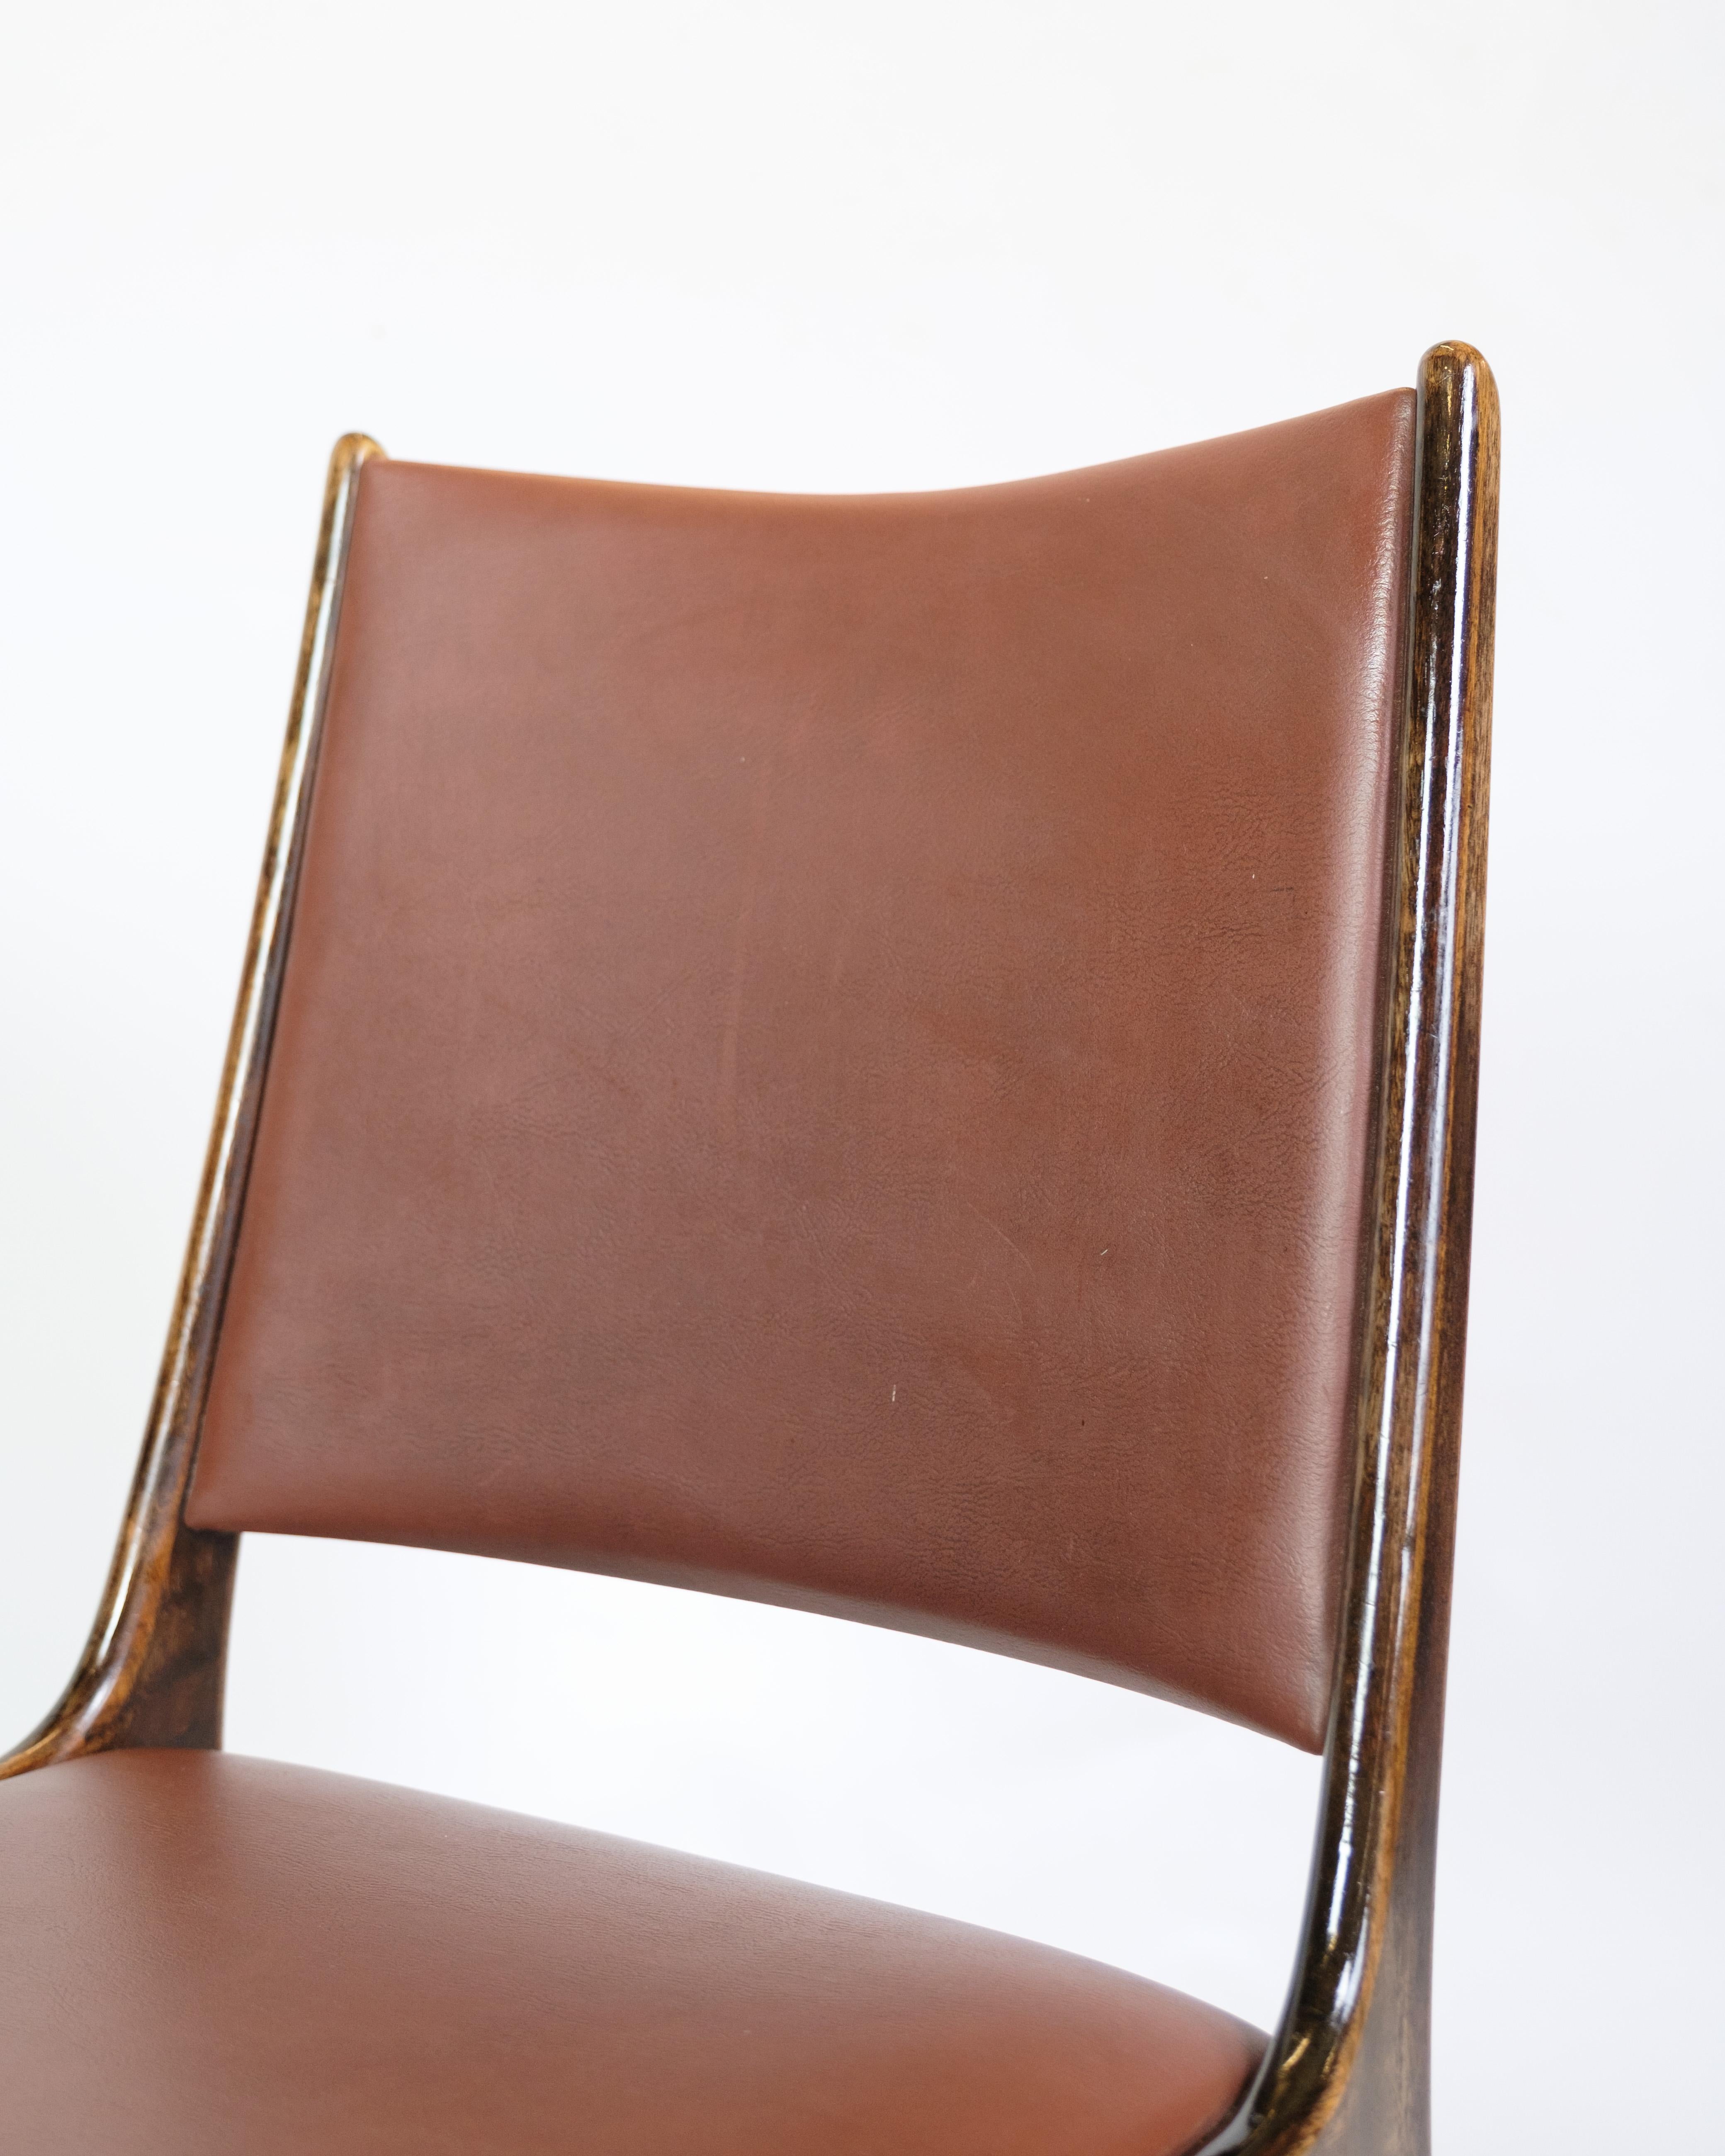 Danish Set Of 4 Dining Room Chairs Made In Rosewood By Johannes Andersen From 1960s For Sale